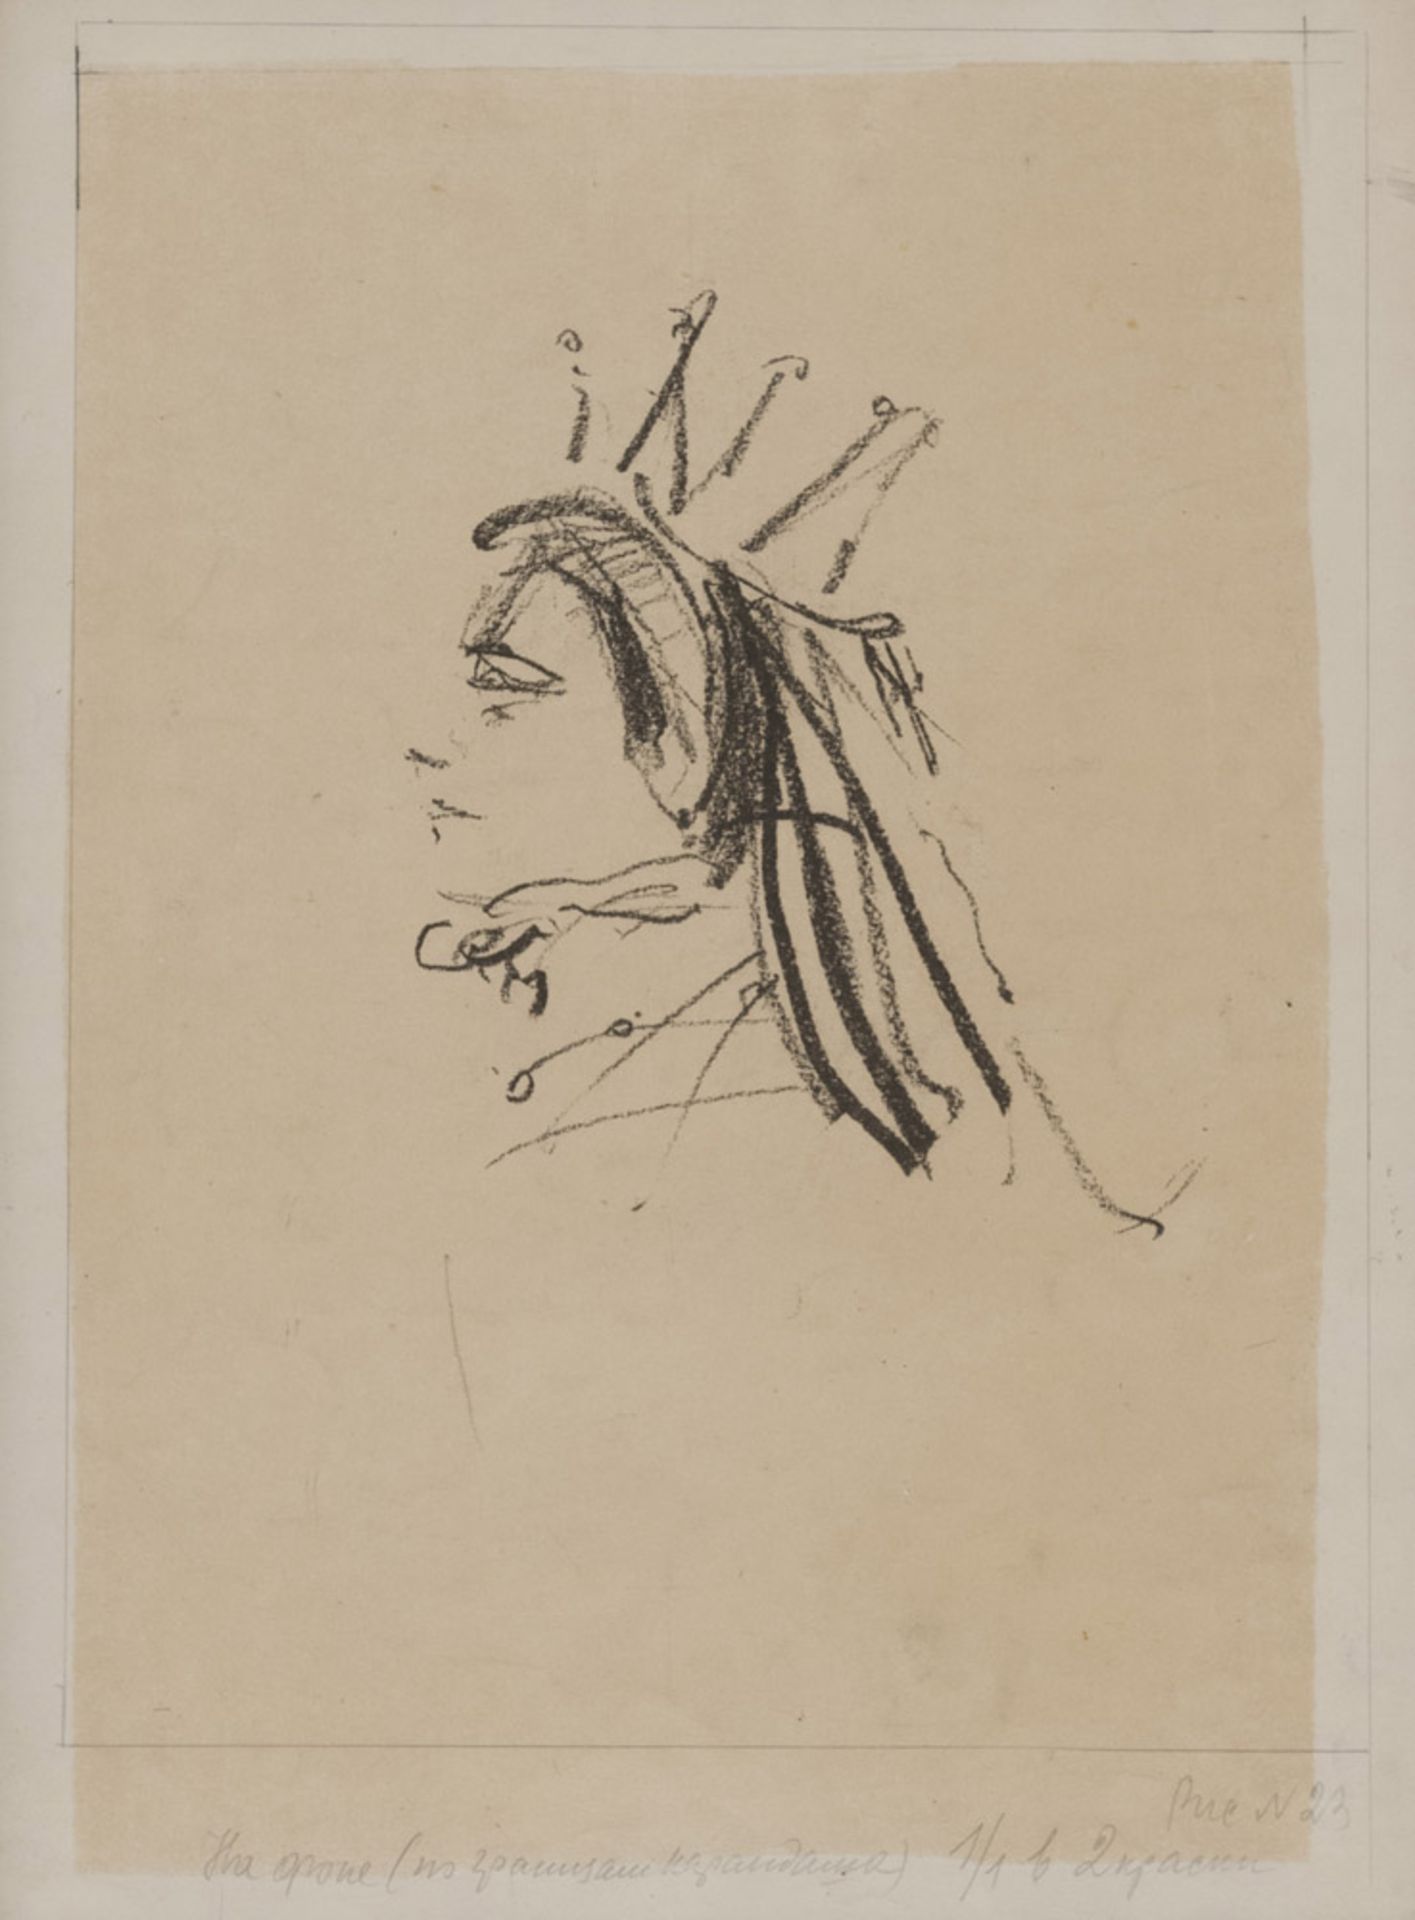 Russian painter, 20th century. Crowned head profile. Lithograph, cm. 37 x 26. PITTORE RUSSO, XX